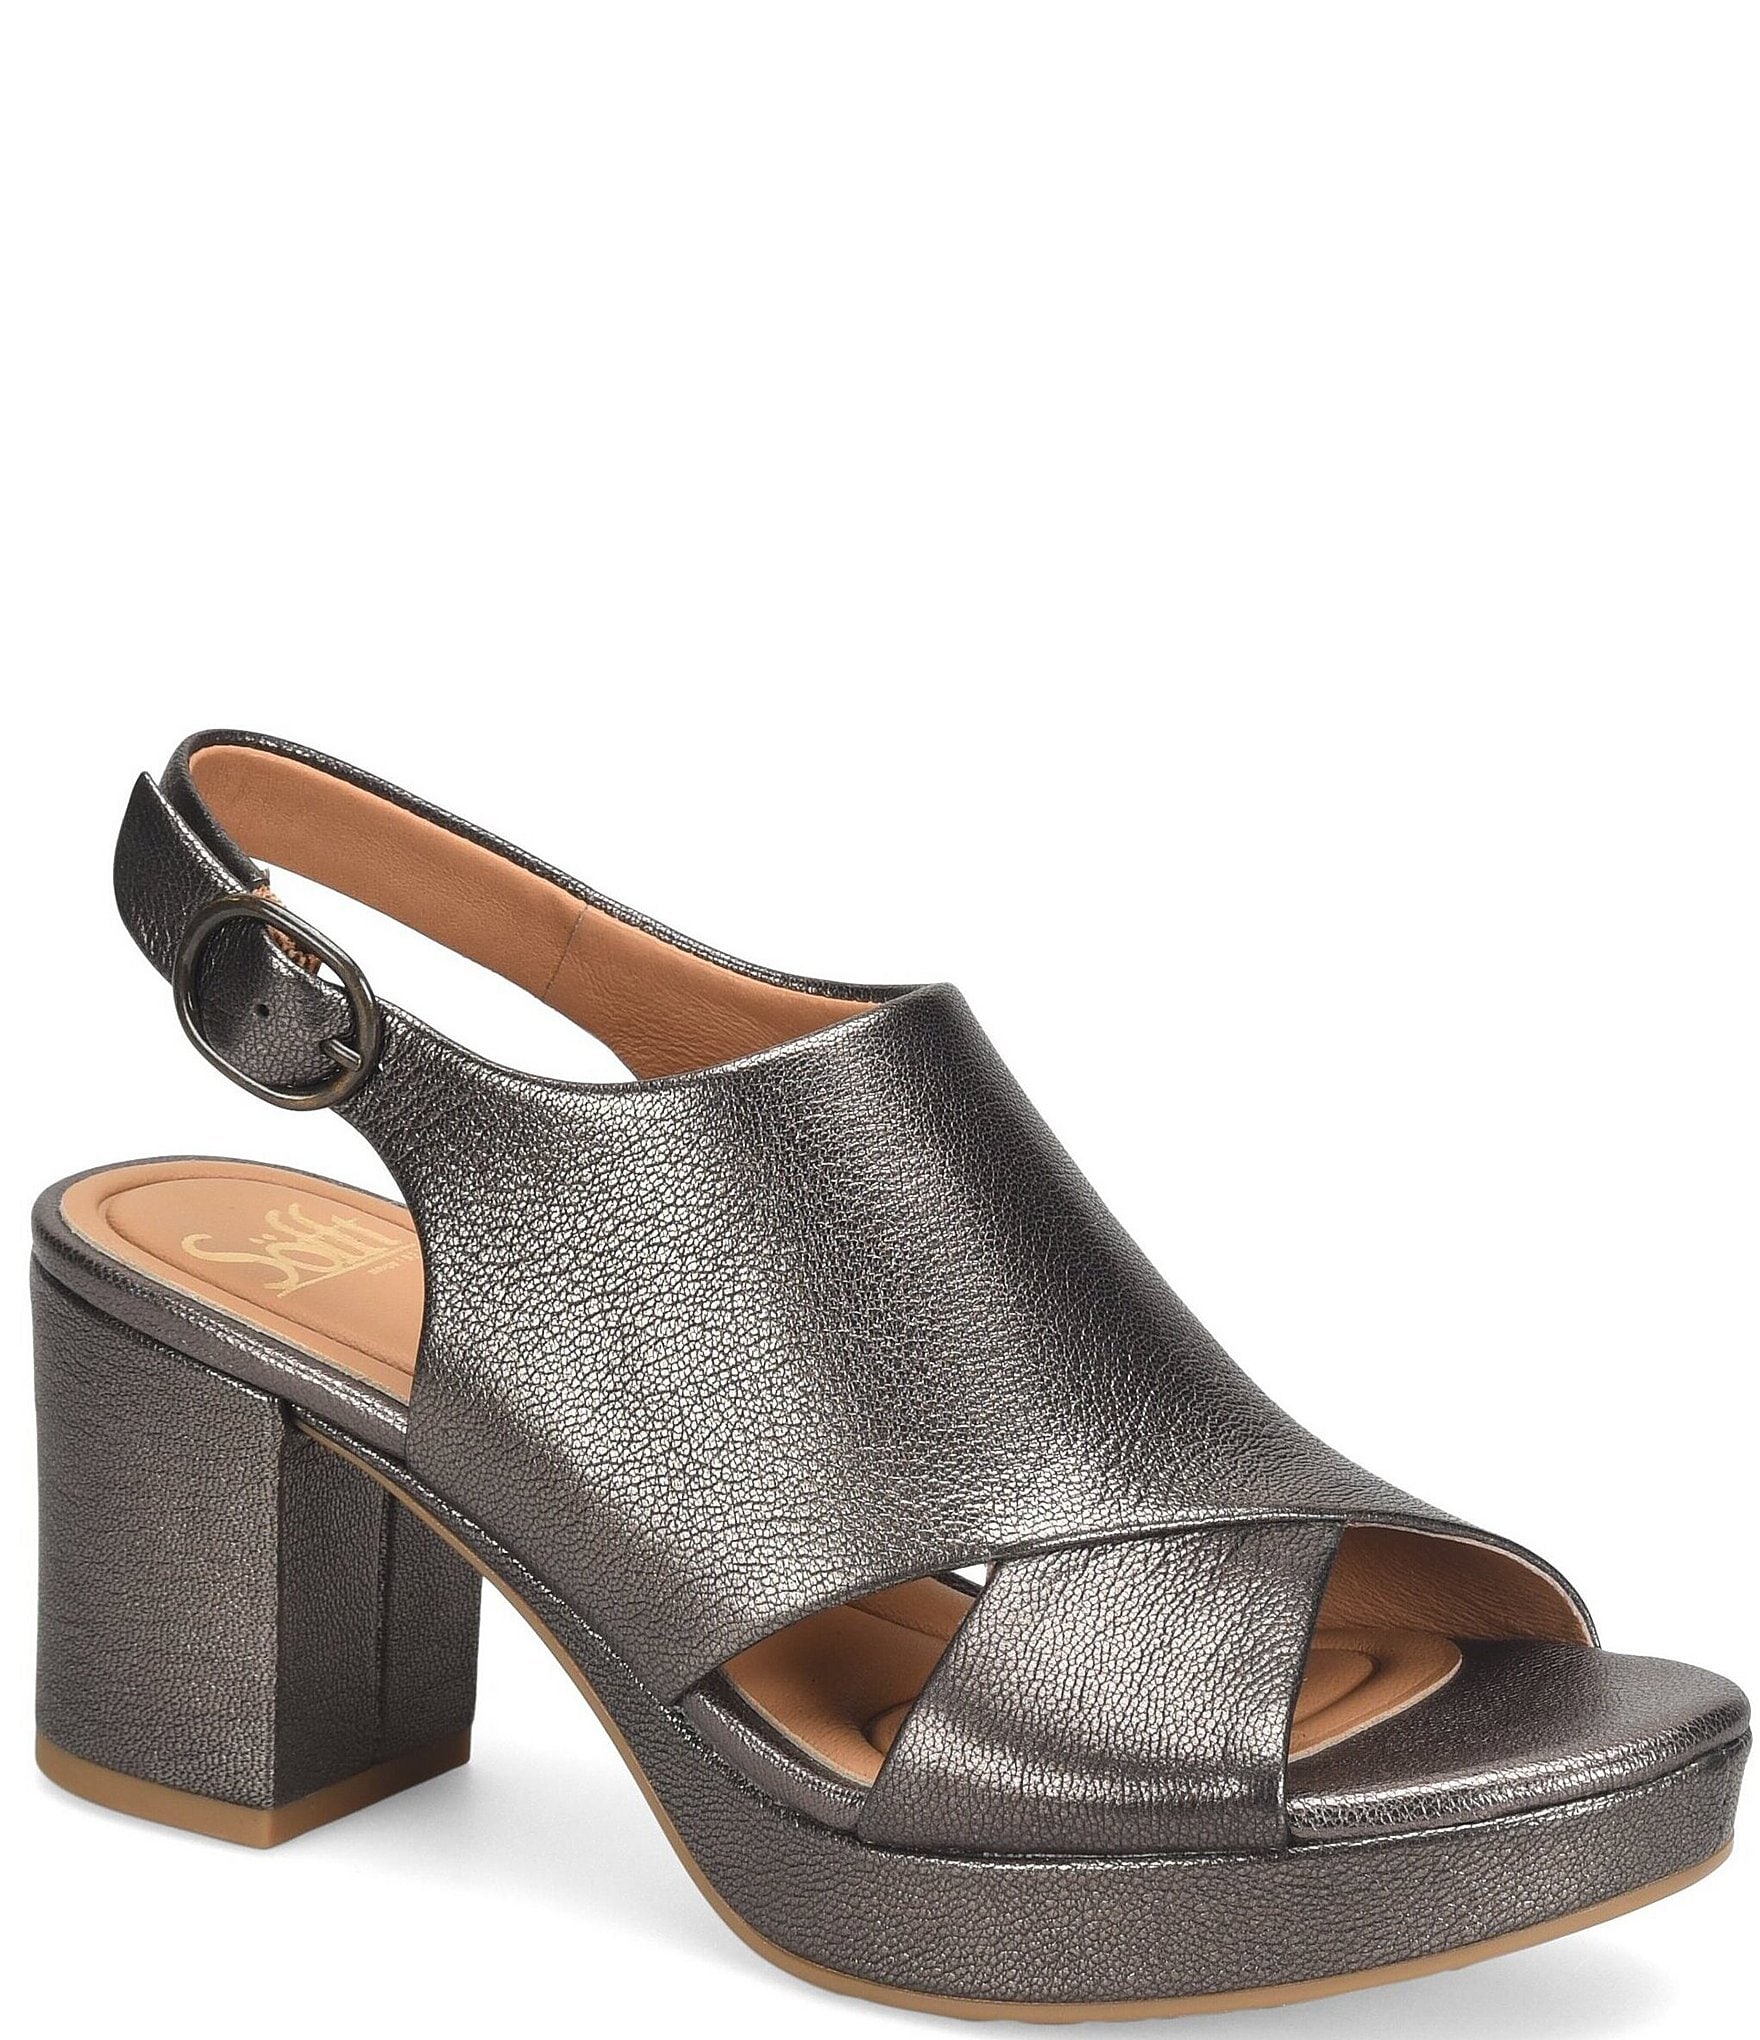 Buy Pewter Women's Sandals - The Milano Pewter